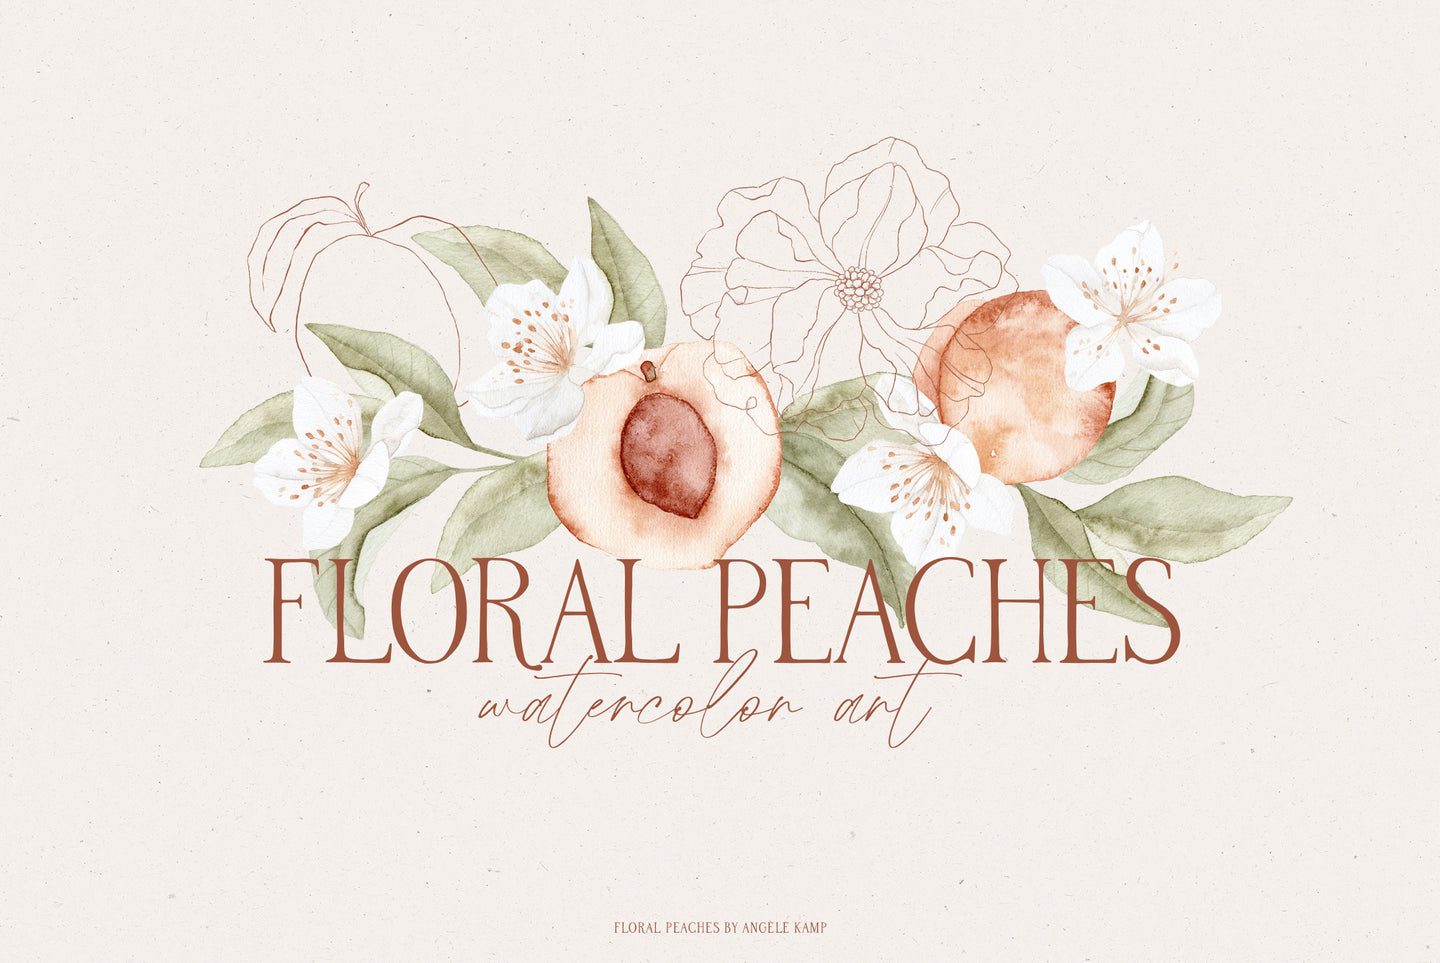 Floral Peaches watercolors